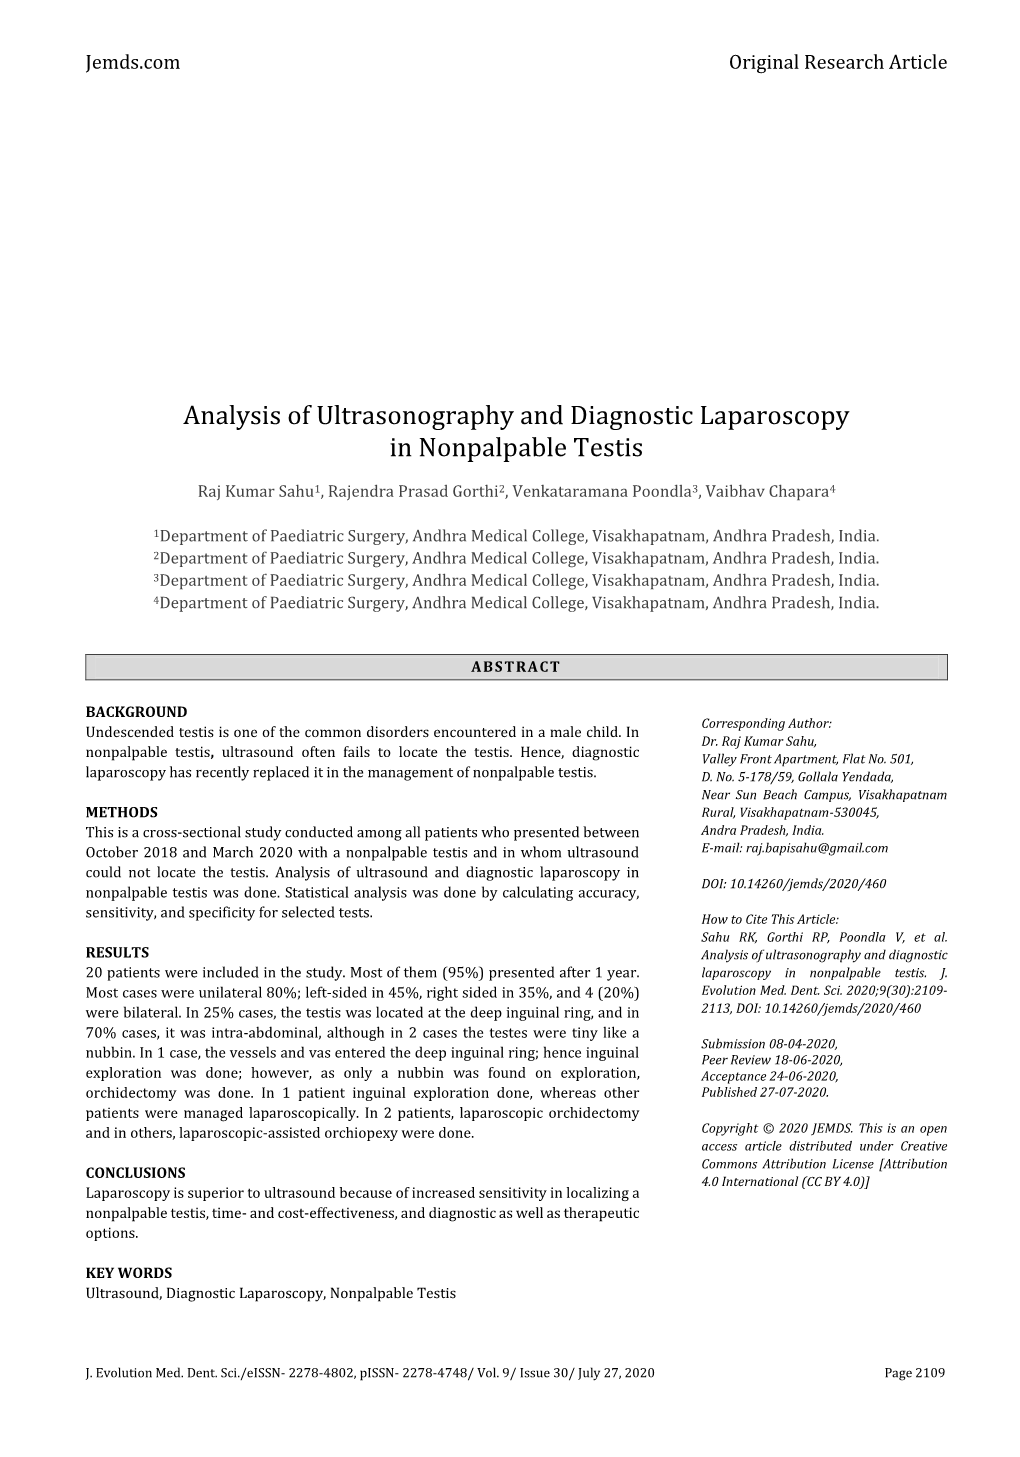 Analysis of Ultrasonography and Diagnostic Laparoscopy in Nonpalpable Testis